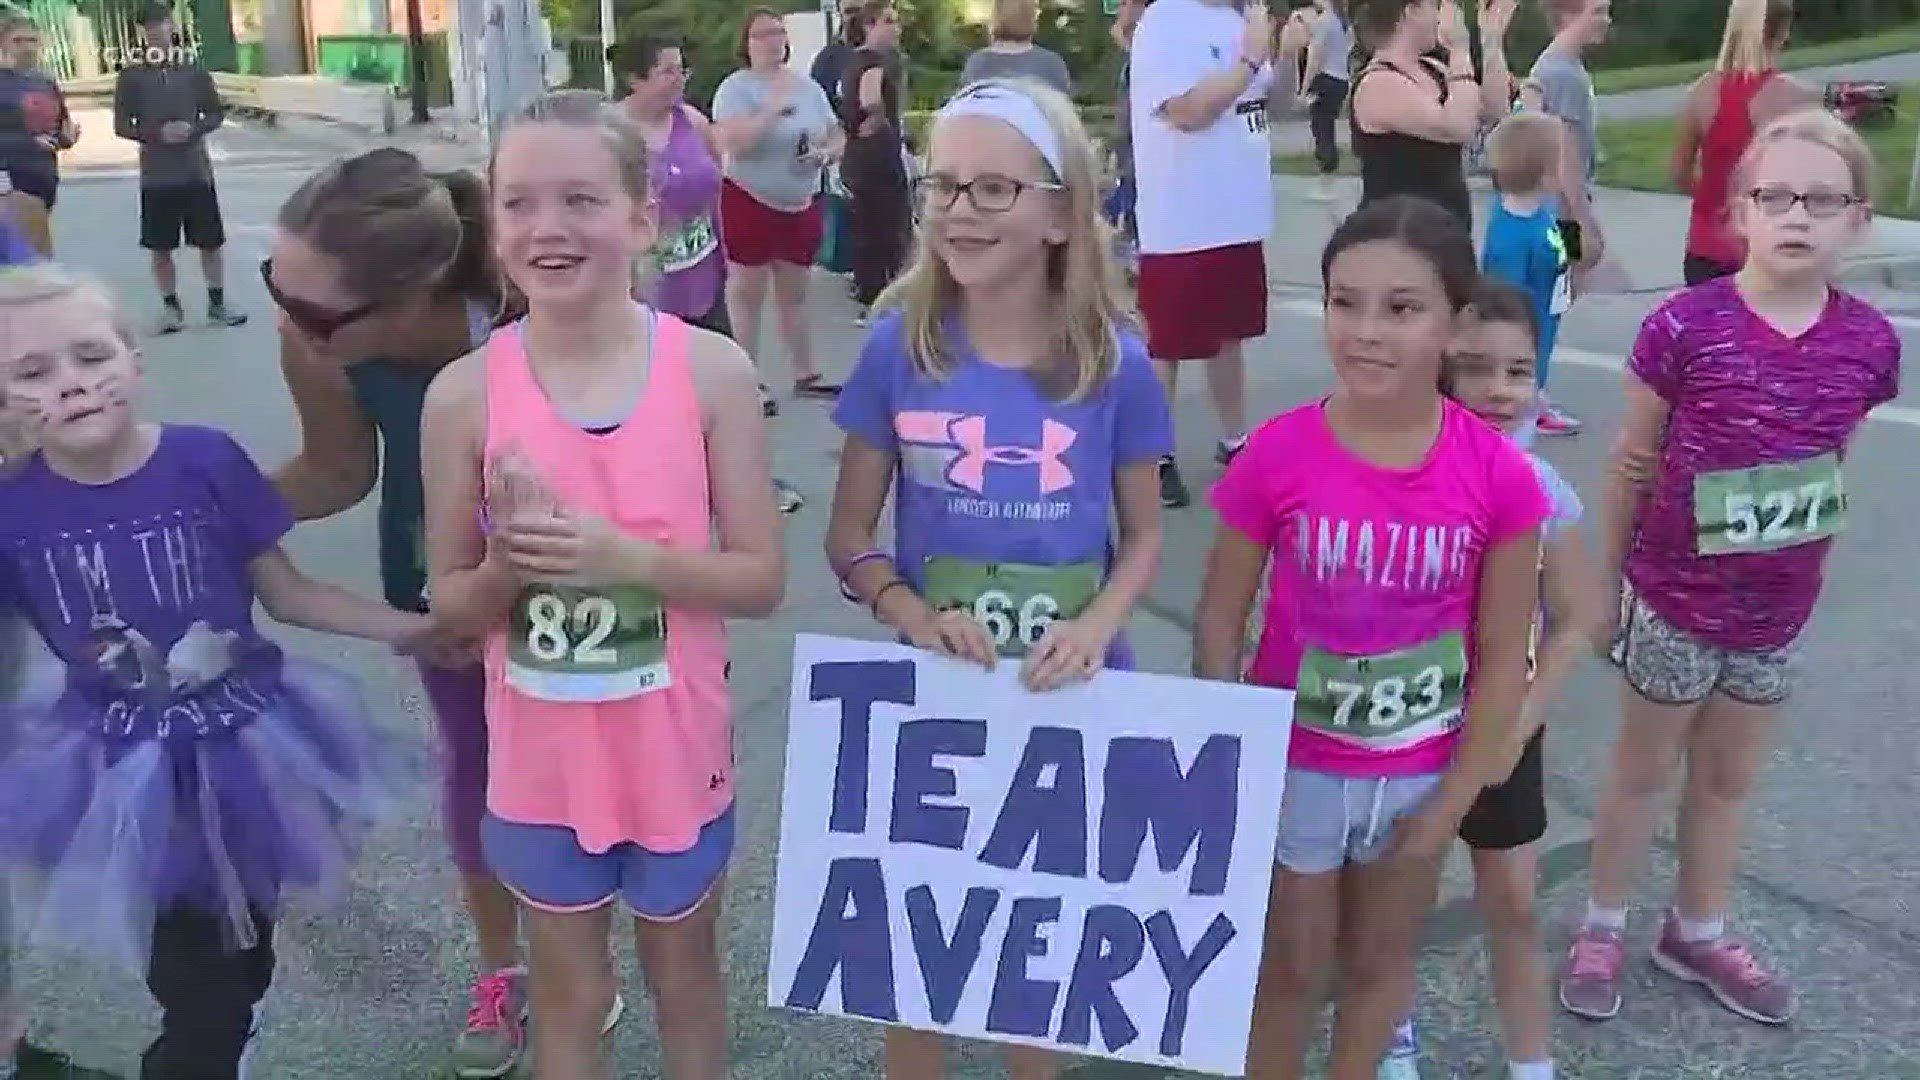 Sept. 16, 2018: We were there to watch youngsters show their support for runners in today's 'Race the River.'